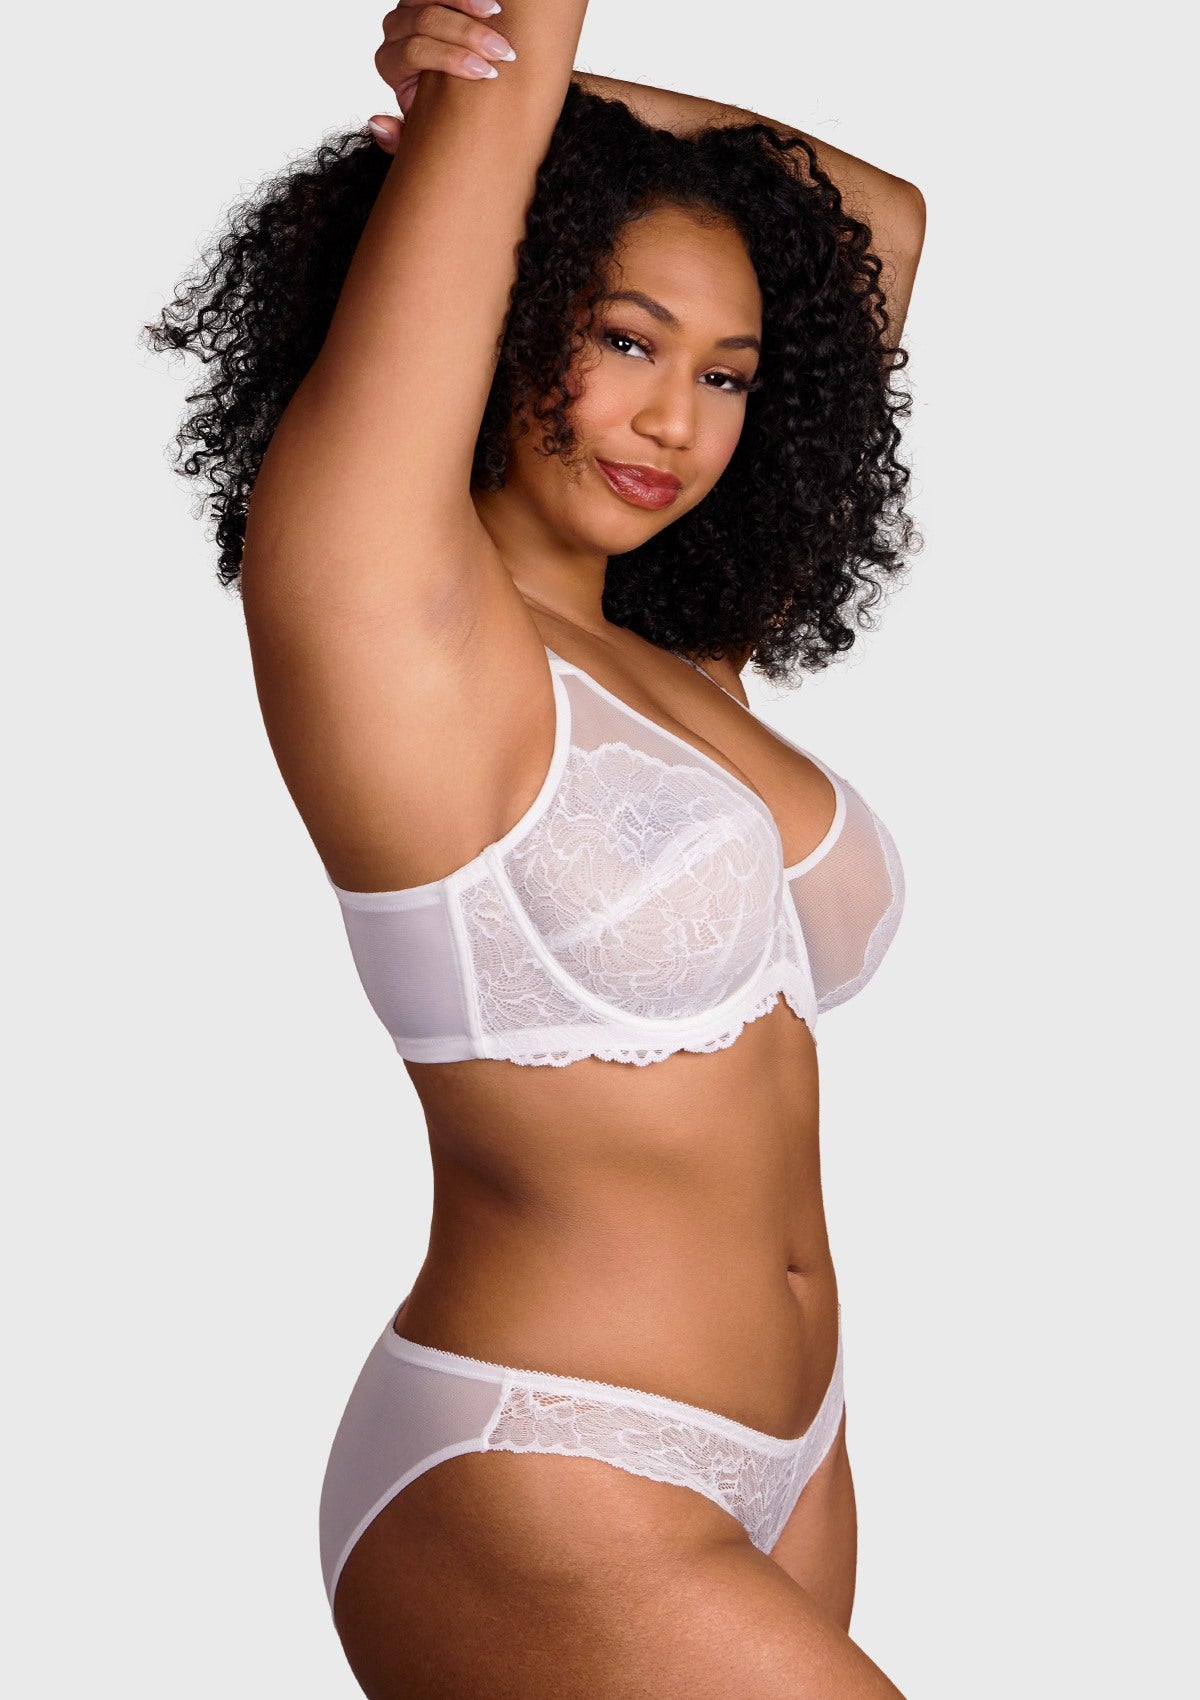 HSIA Blossom Bestseller Unlined Underwire Lace Bra - White / 40 / H